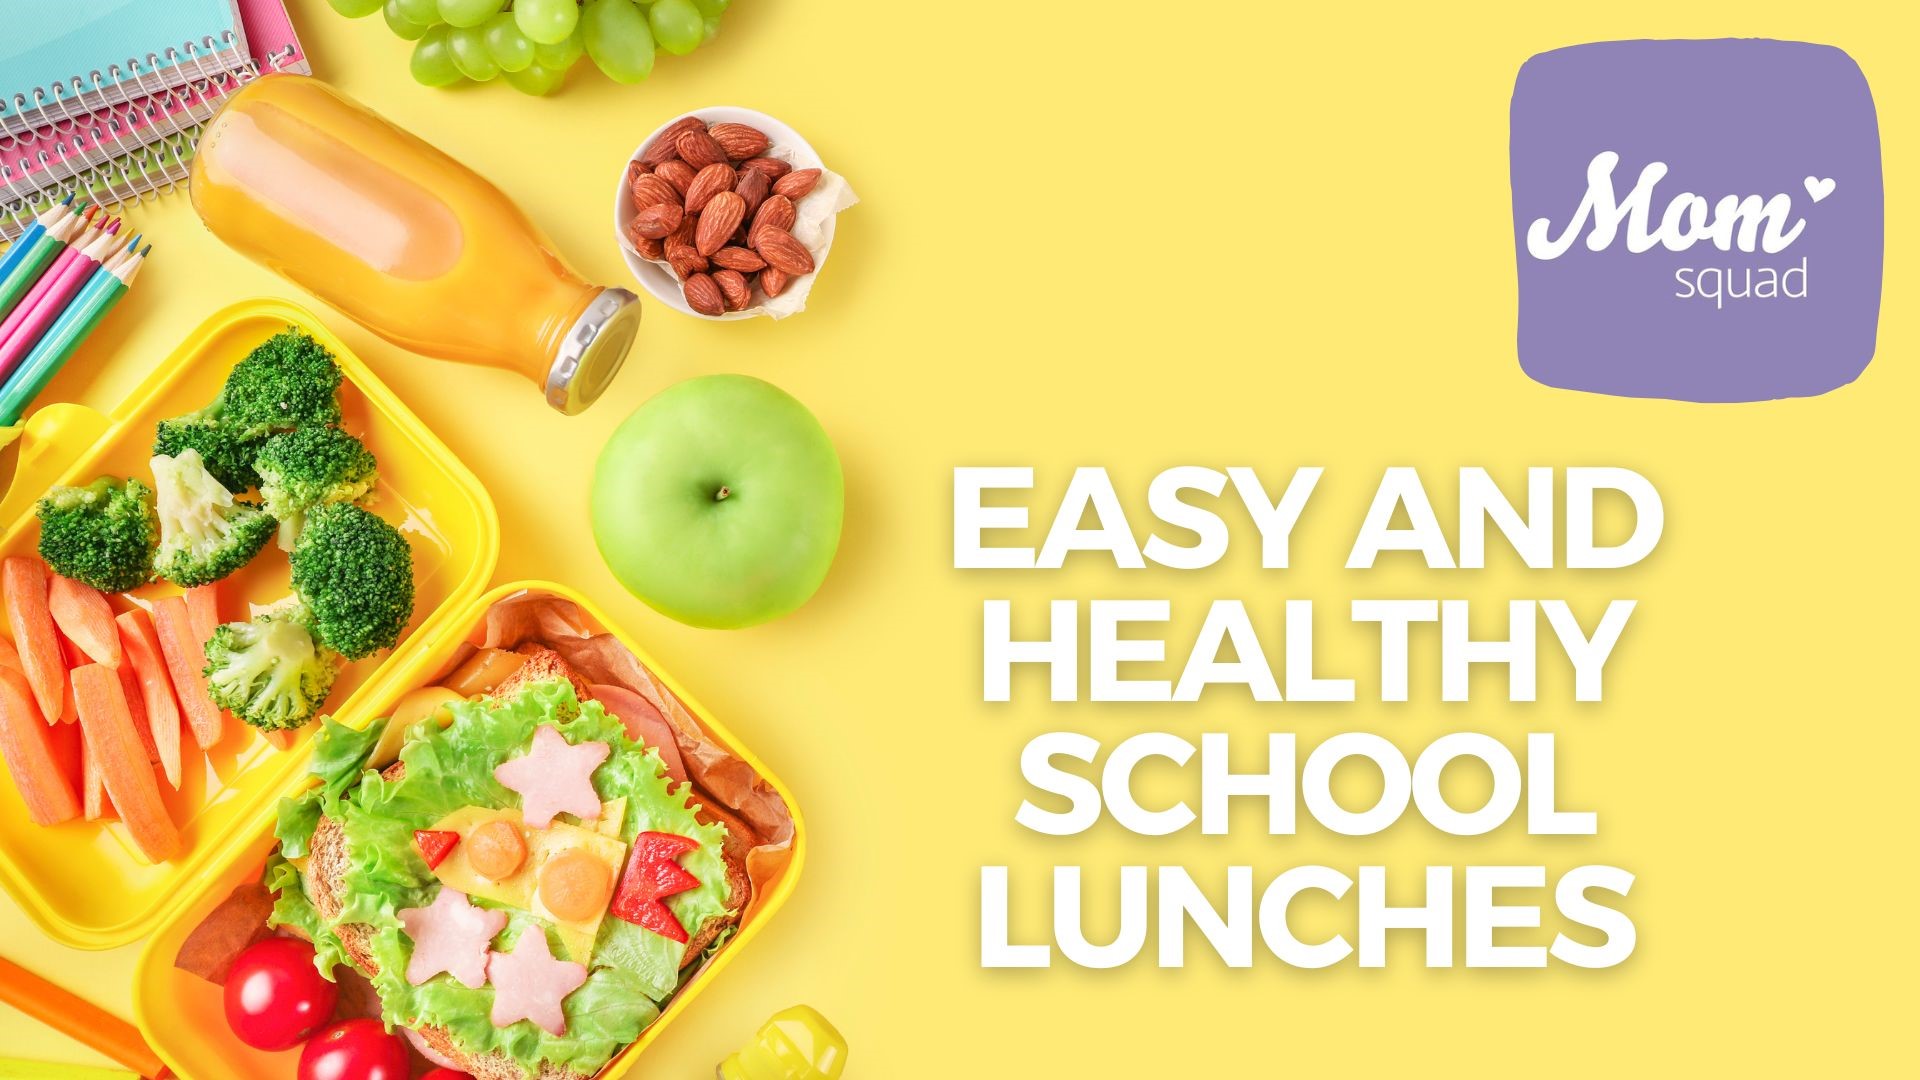 Maureen Kyle talks with a dietitian about how to create easy and healthy school lunches for kids. The four categories to follow and some creative ideas.